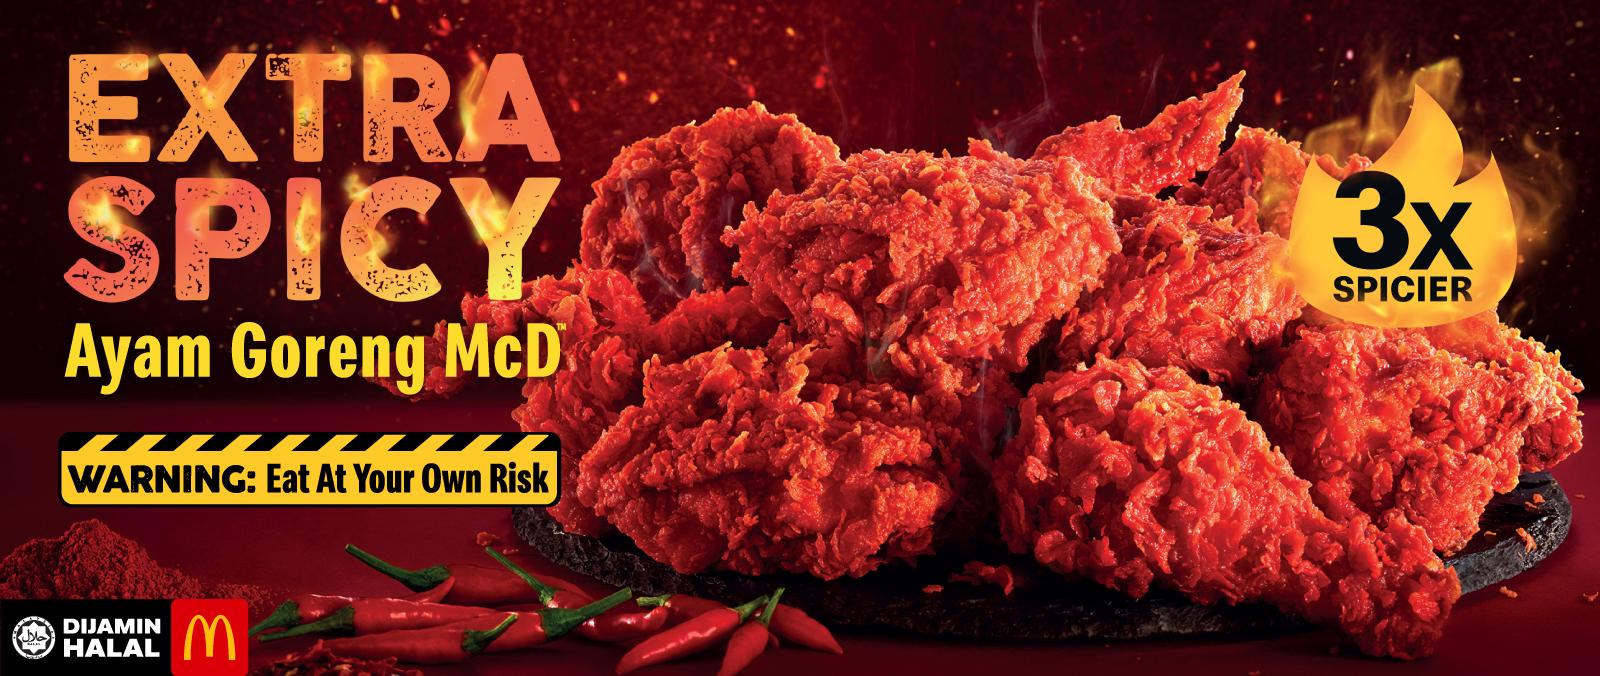 Statement on the new Extra Spicy Ayam Goreng McD's image'